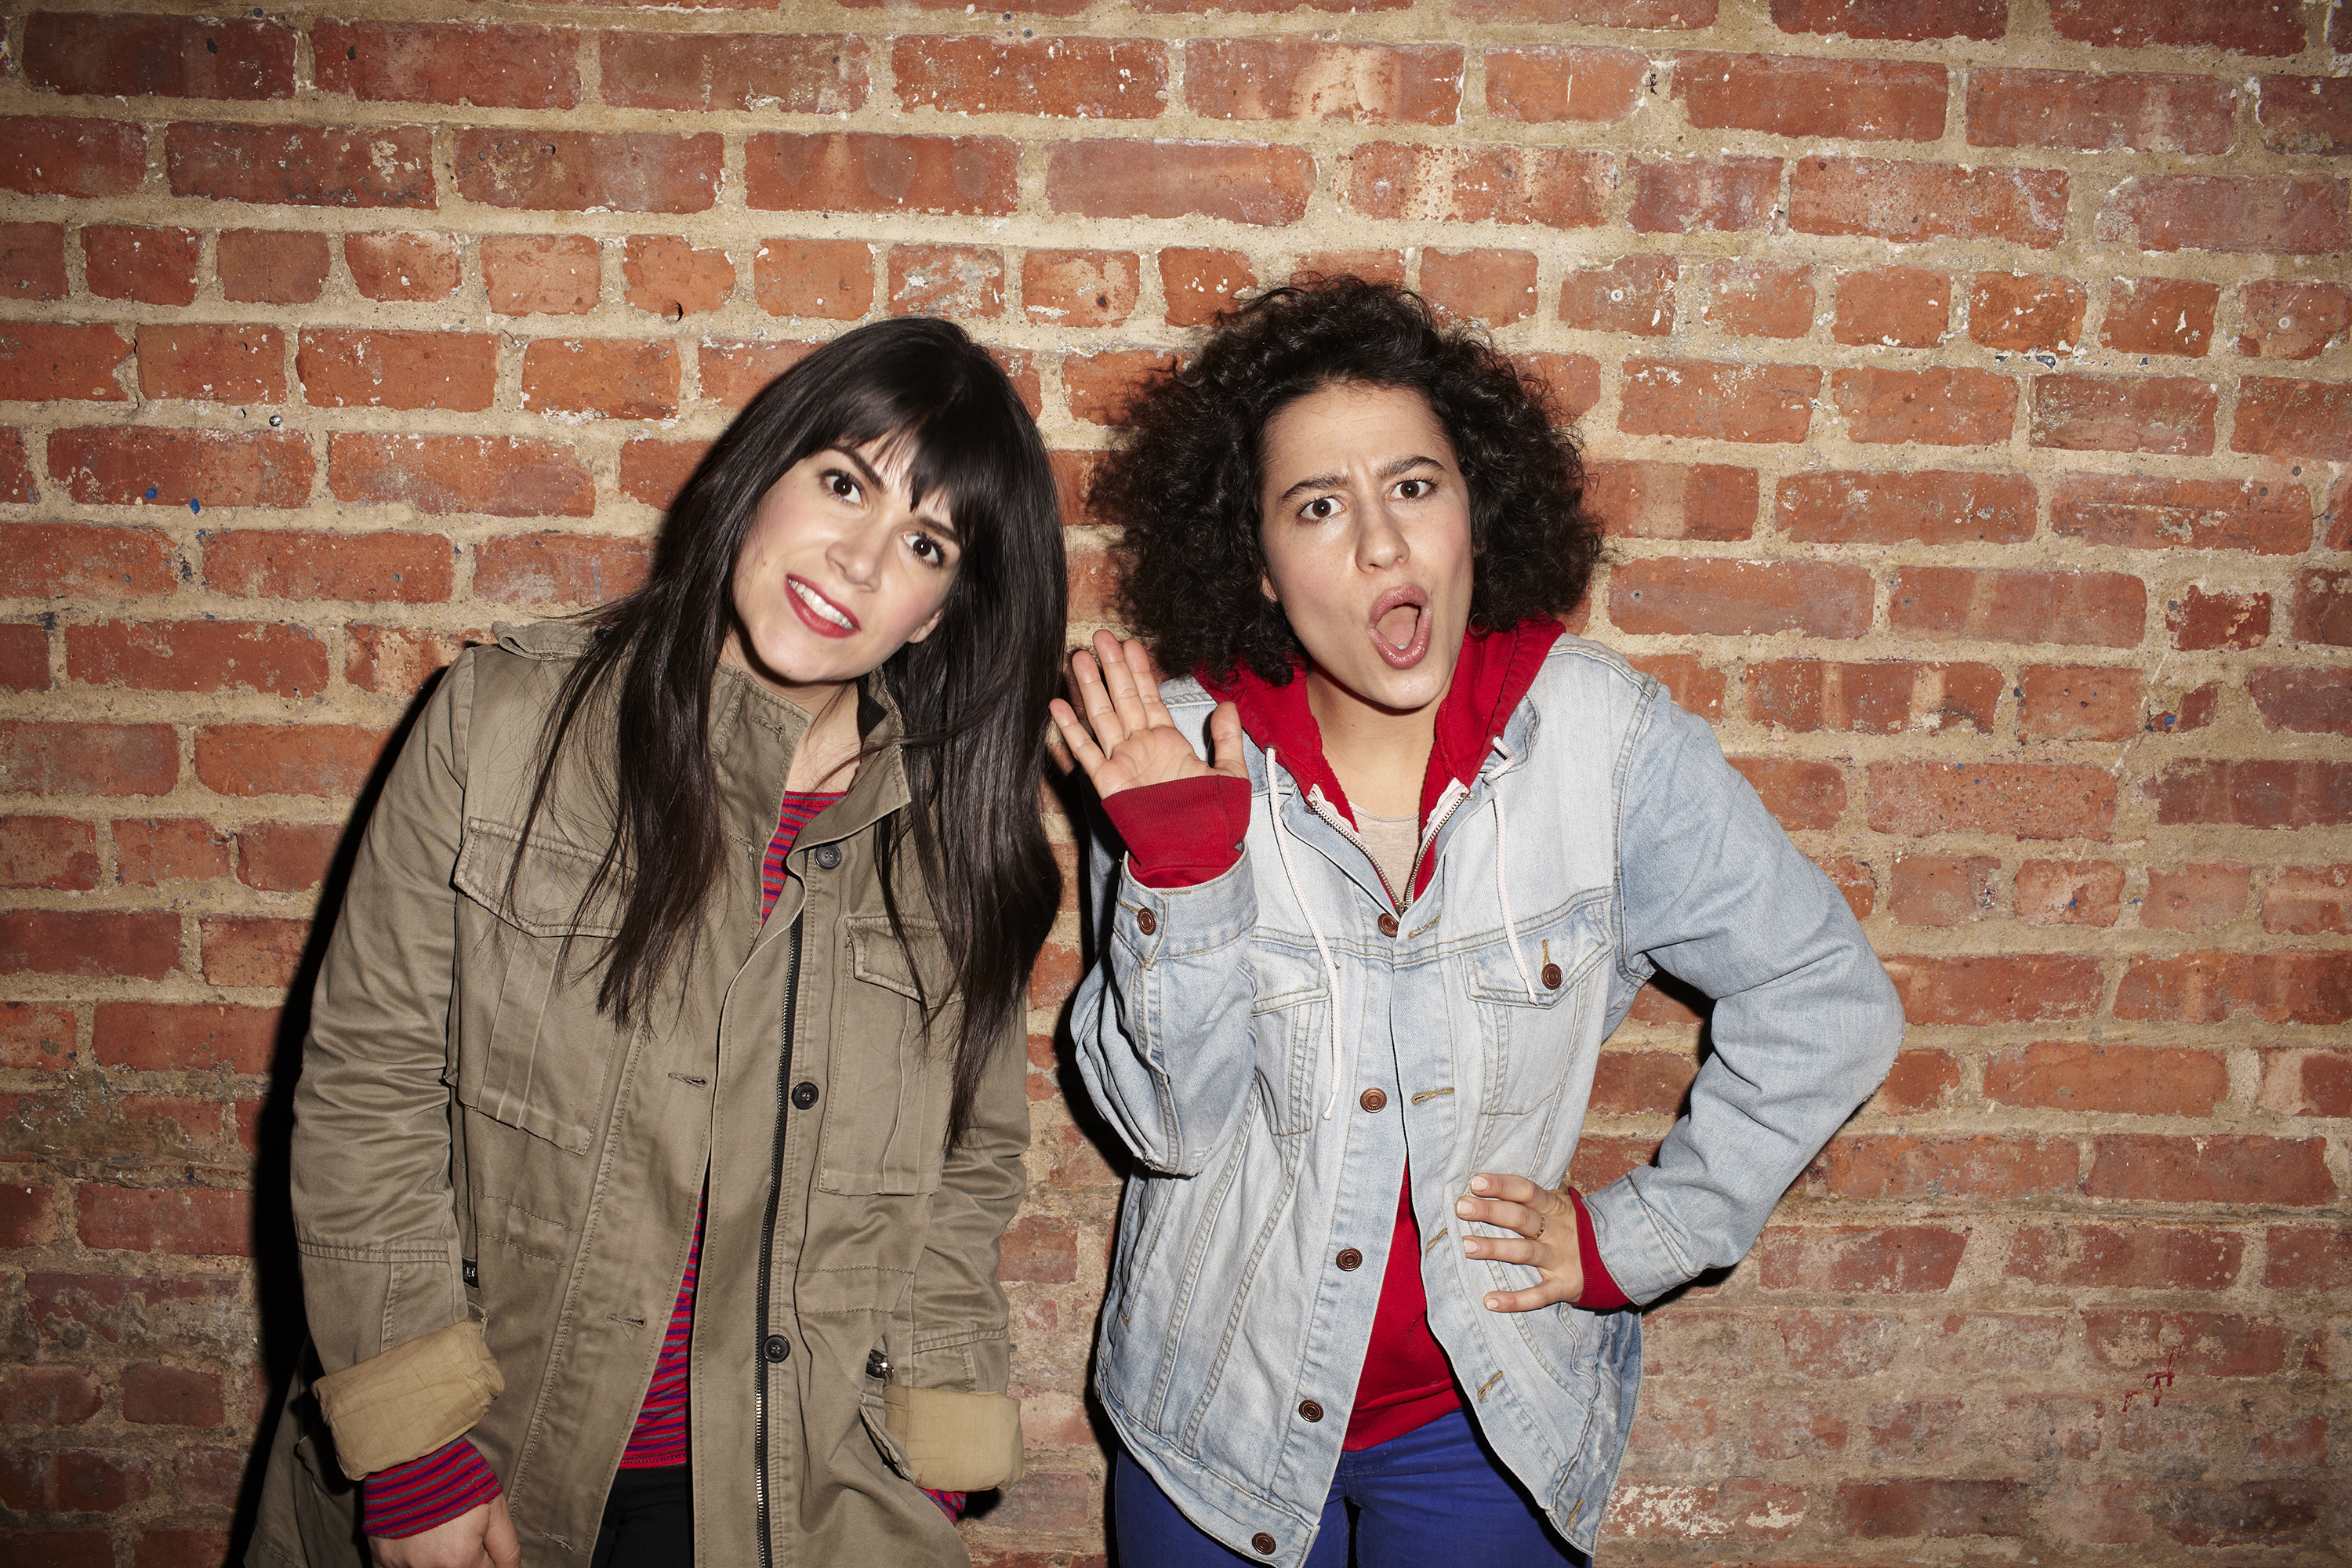 Broad City comediennes